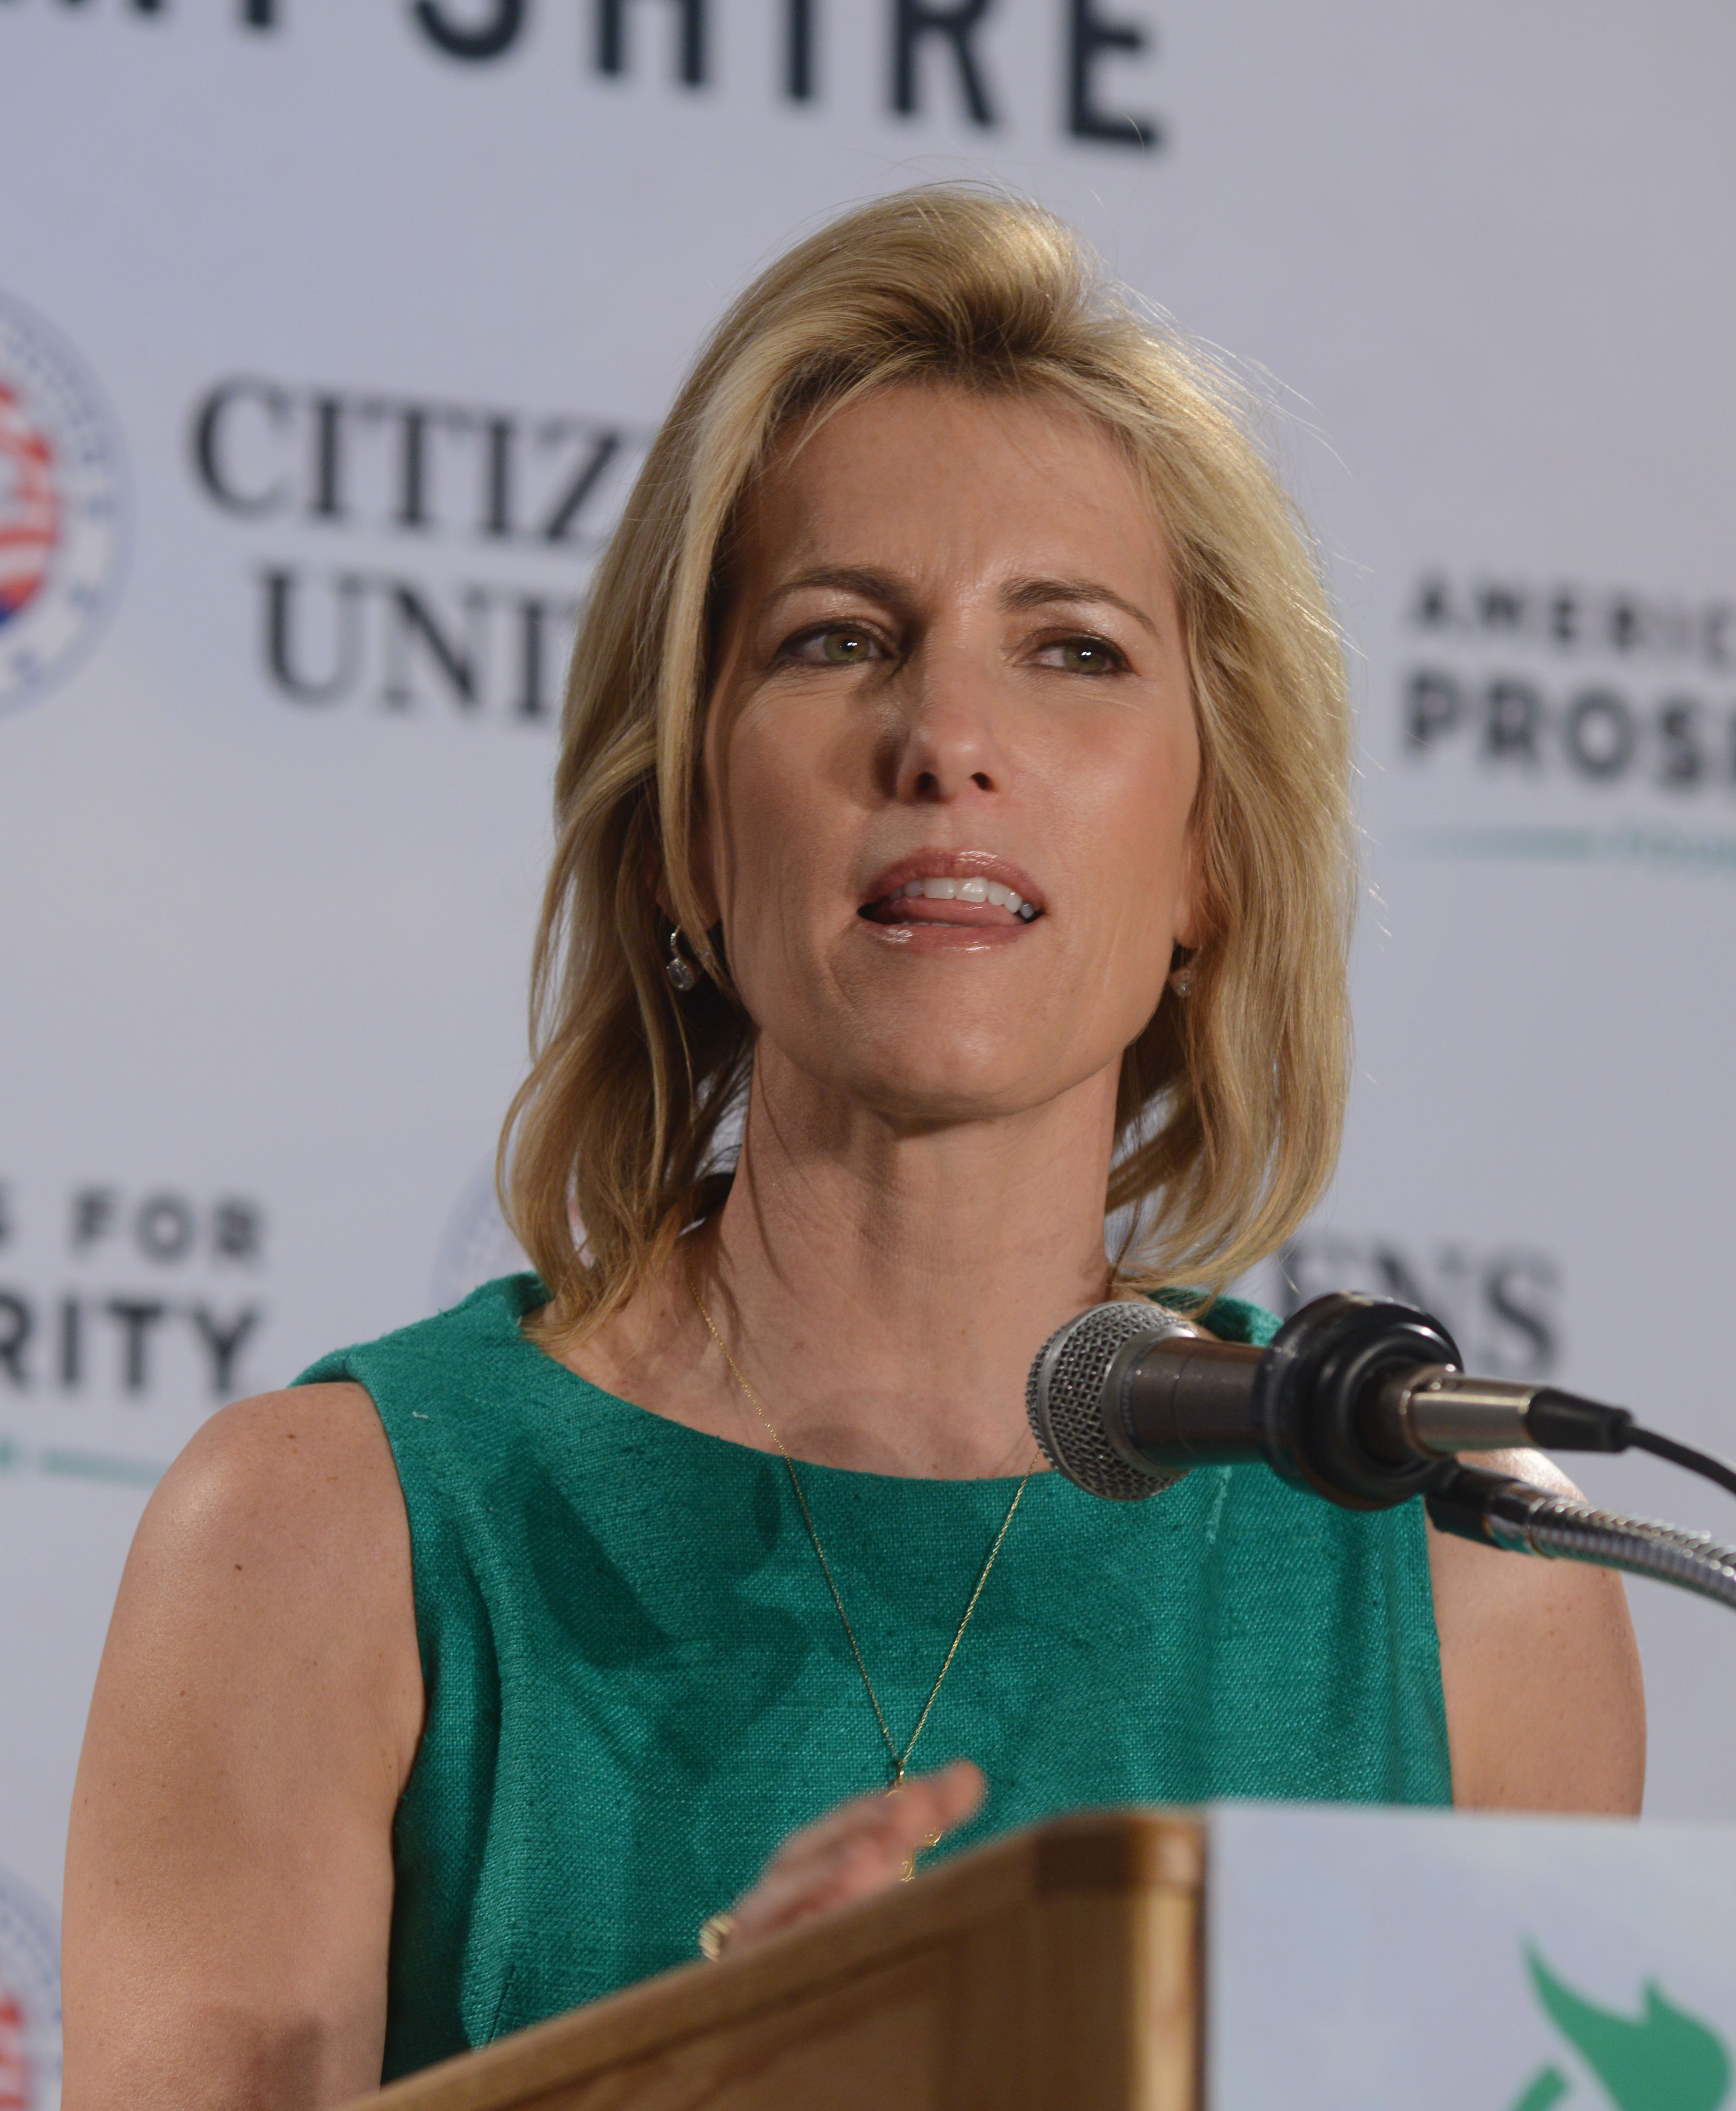 Laura Ingraham during the Freedom Summit at The Executive Court Banquet Facility April 12, 2014, in Manchester, New Hampshire. | Source: Getty Images